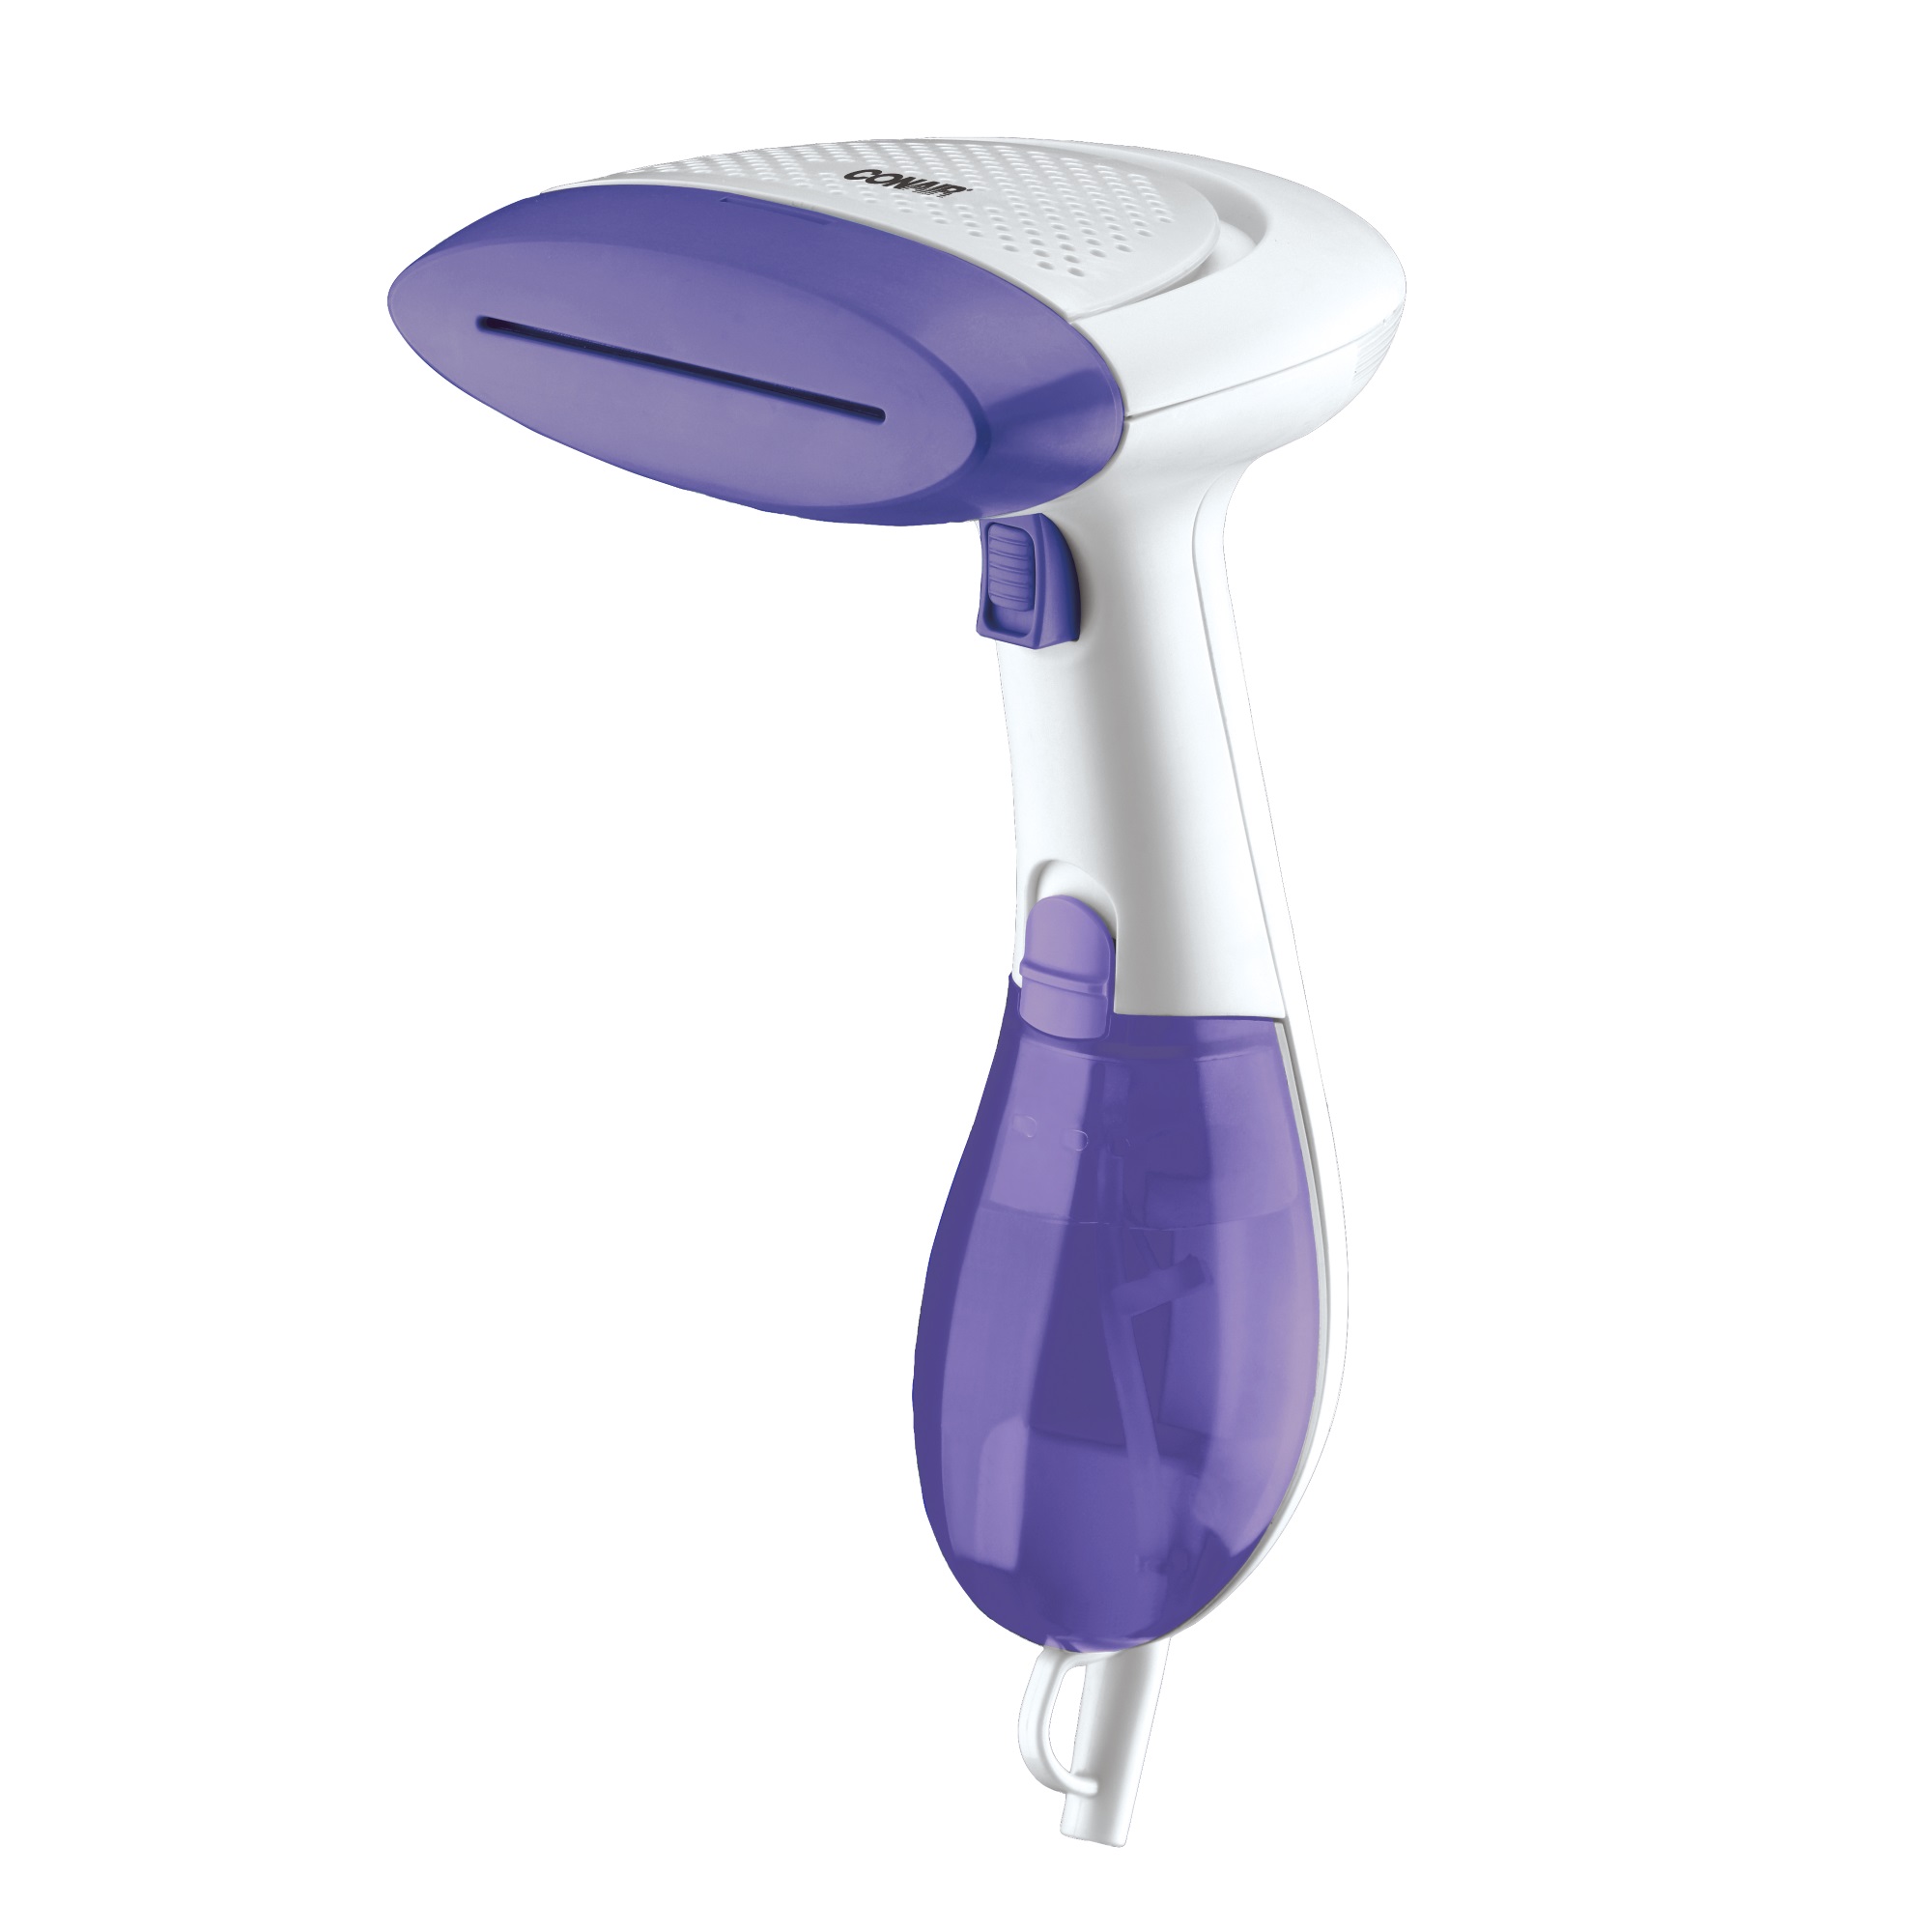 Conair ExtremeSteam Handheld Fabric Steamer with Dual Heat,Purple, Model GS237PR - image 1 of 15